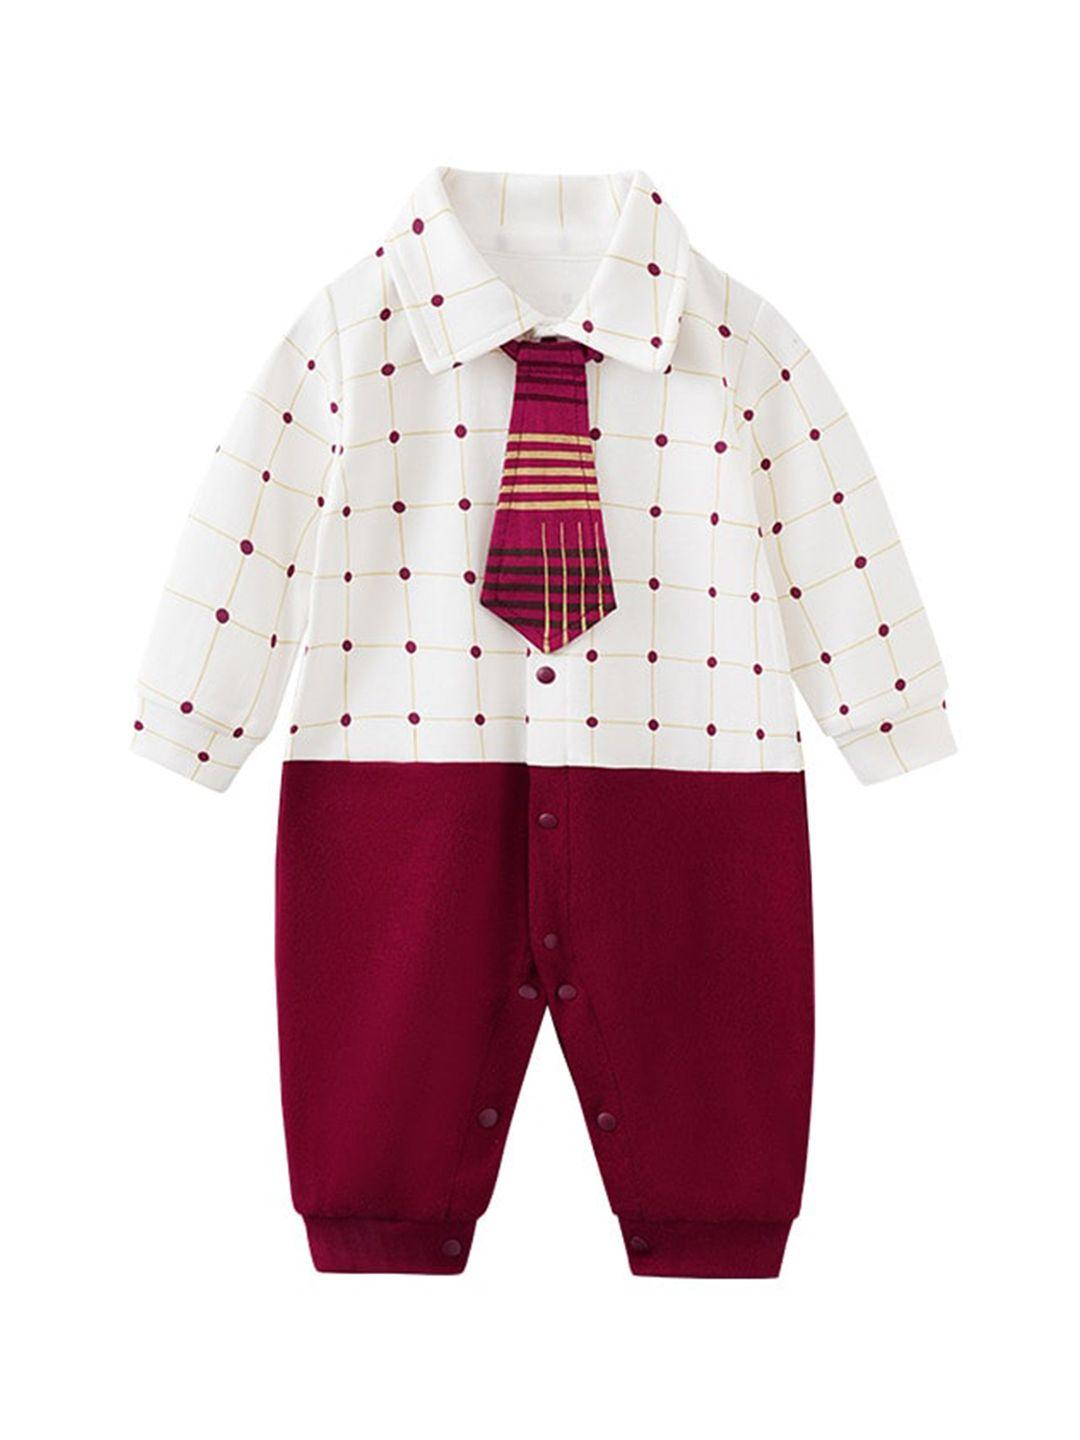 stylecast-infant-boys-red-checked-cotton-rompers